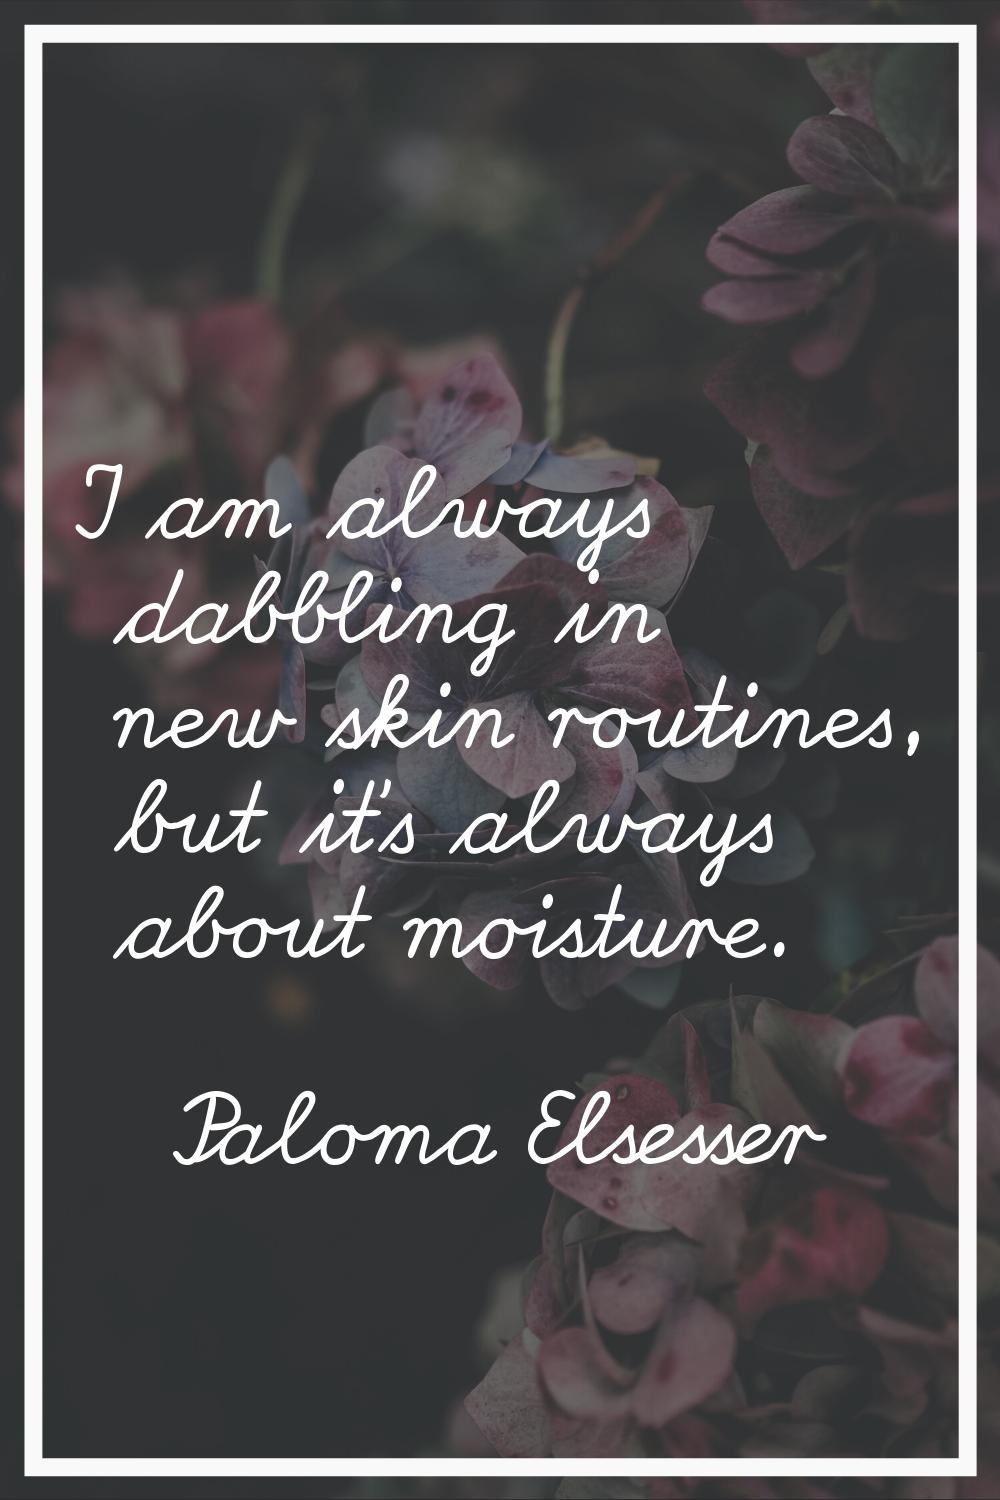 I am always dabbling in new skin routines, but it's always about moisture.